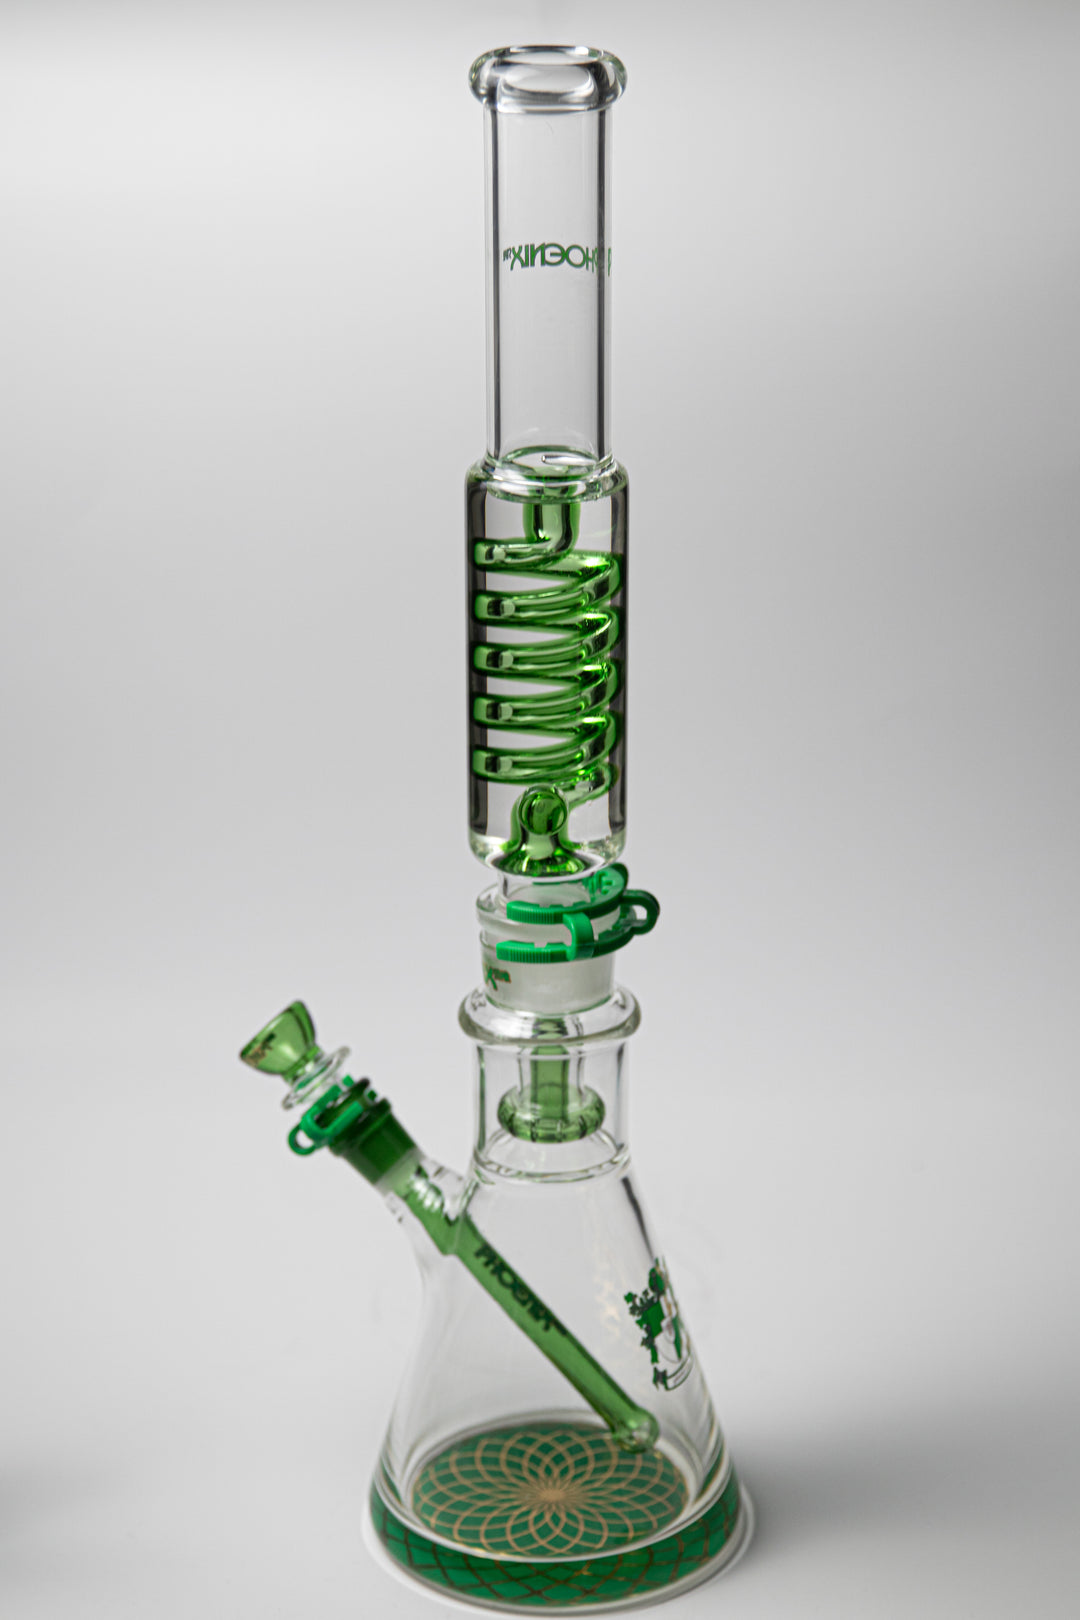 19.5-inch Freezable Beaker Bong Phoenix – a unique weed and dab companion in water bong style glass from the Phoenix brand. For sale now, this 19.5-inch beauty includes a 14MM male bowl, a straight﻿ down stem, and a top part that can be frozen for extra cool hits. The integrated percolator ensures a smooth smoking experience, preventing water splashback, cooling the smoke down, and providing extra filtration . Color green 